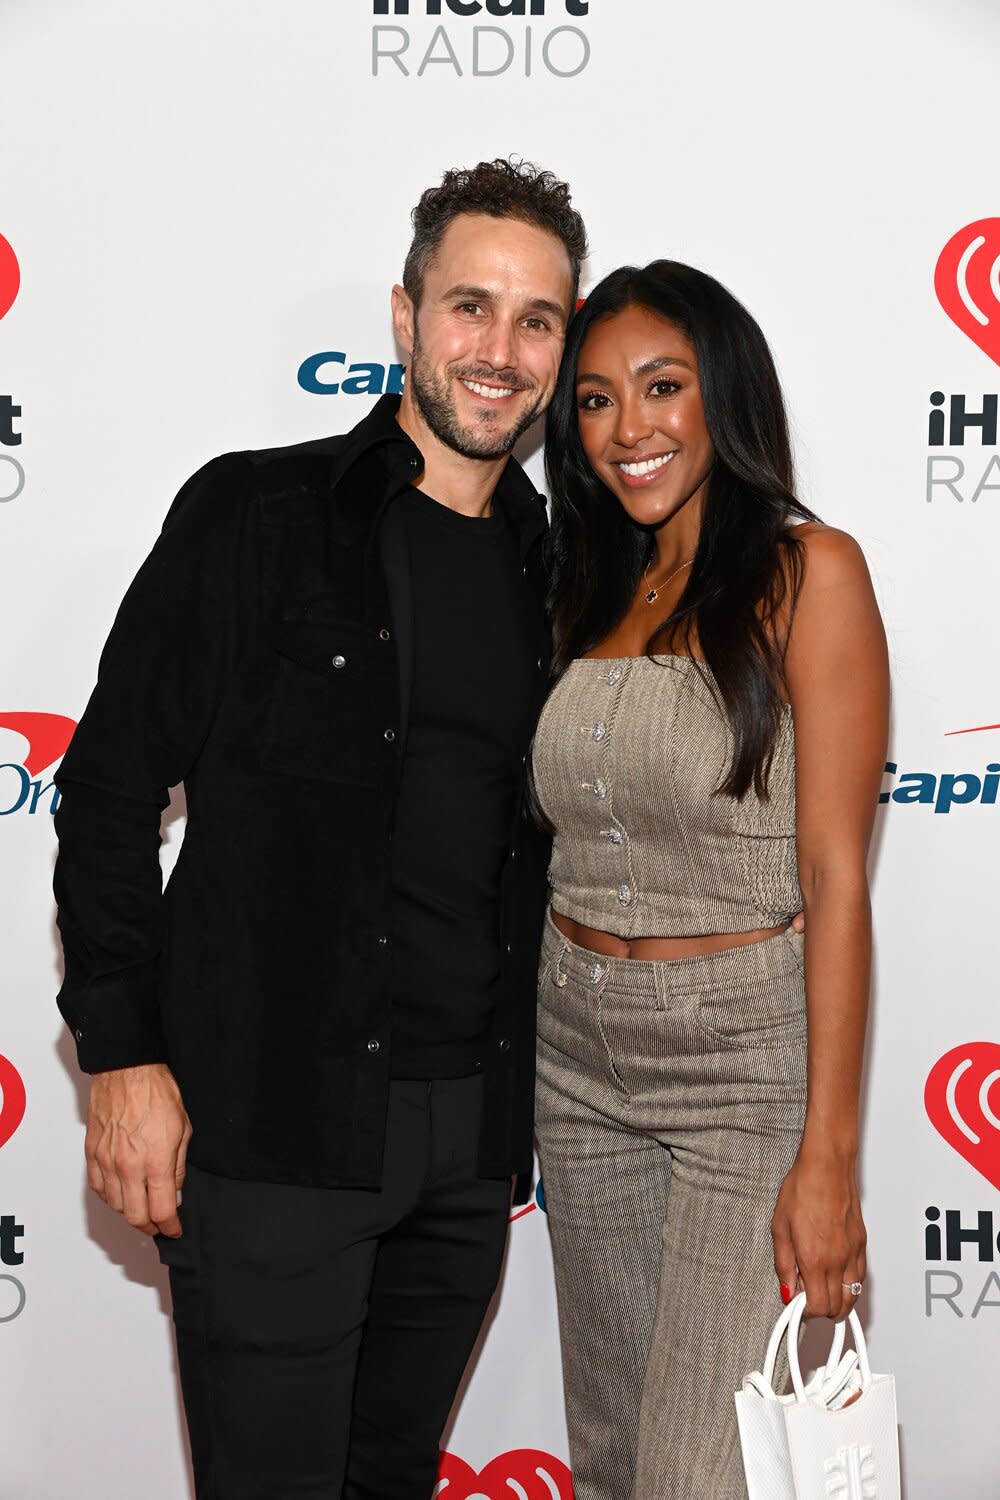 Zac Clark and Tayshia Adams attend the 2021 iHeartRadio Music Festival on September 17, 2021 at T-Mobile Arena in Las Vegas, Nevada.